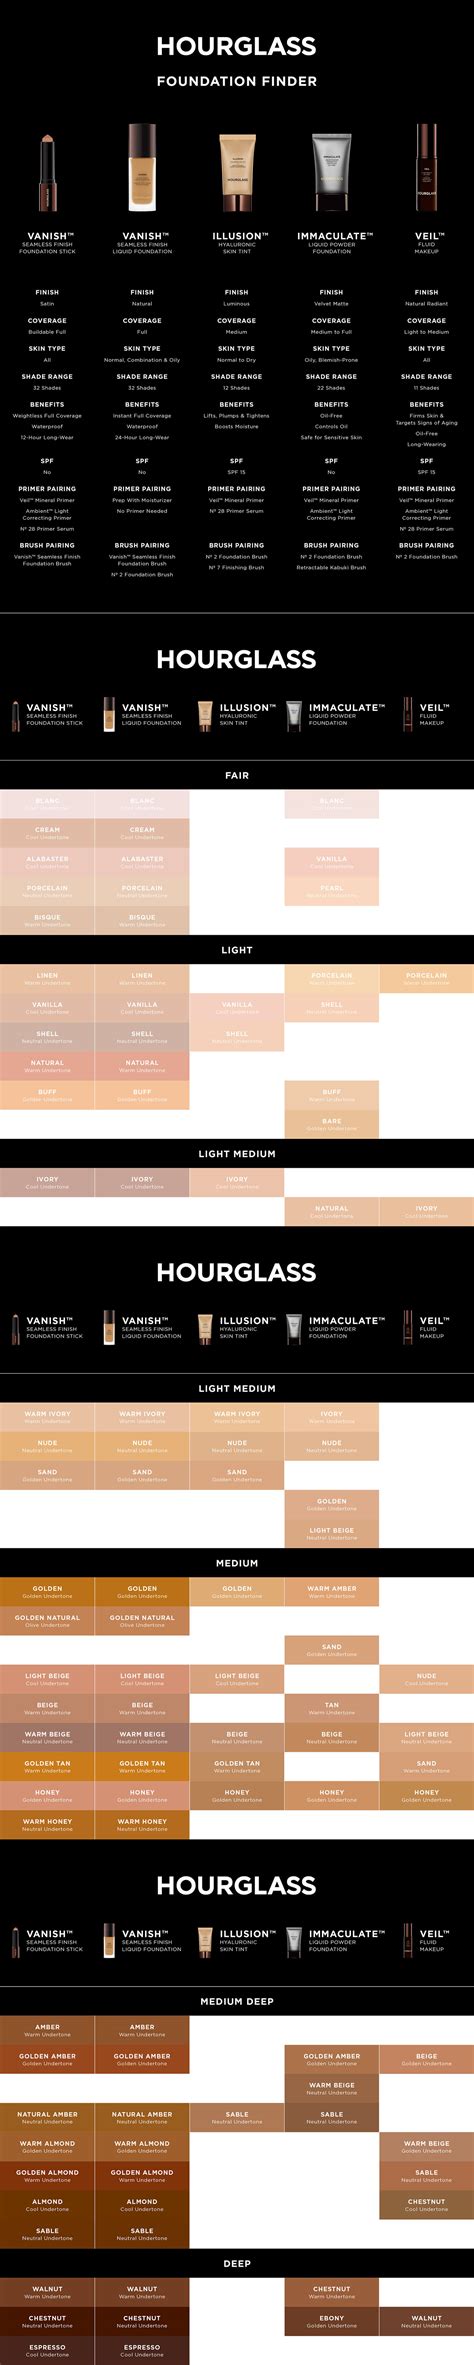 foundation shade finder hourglass cosmetics